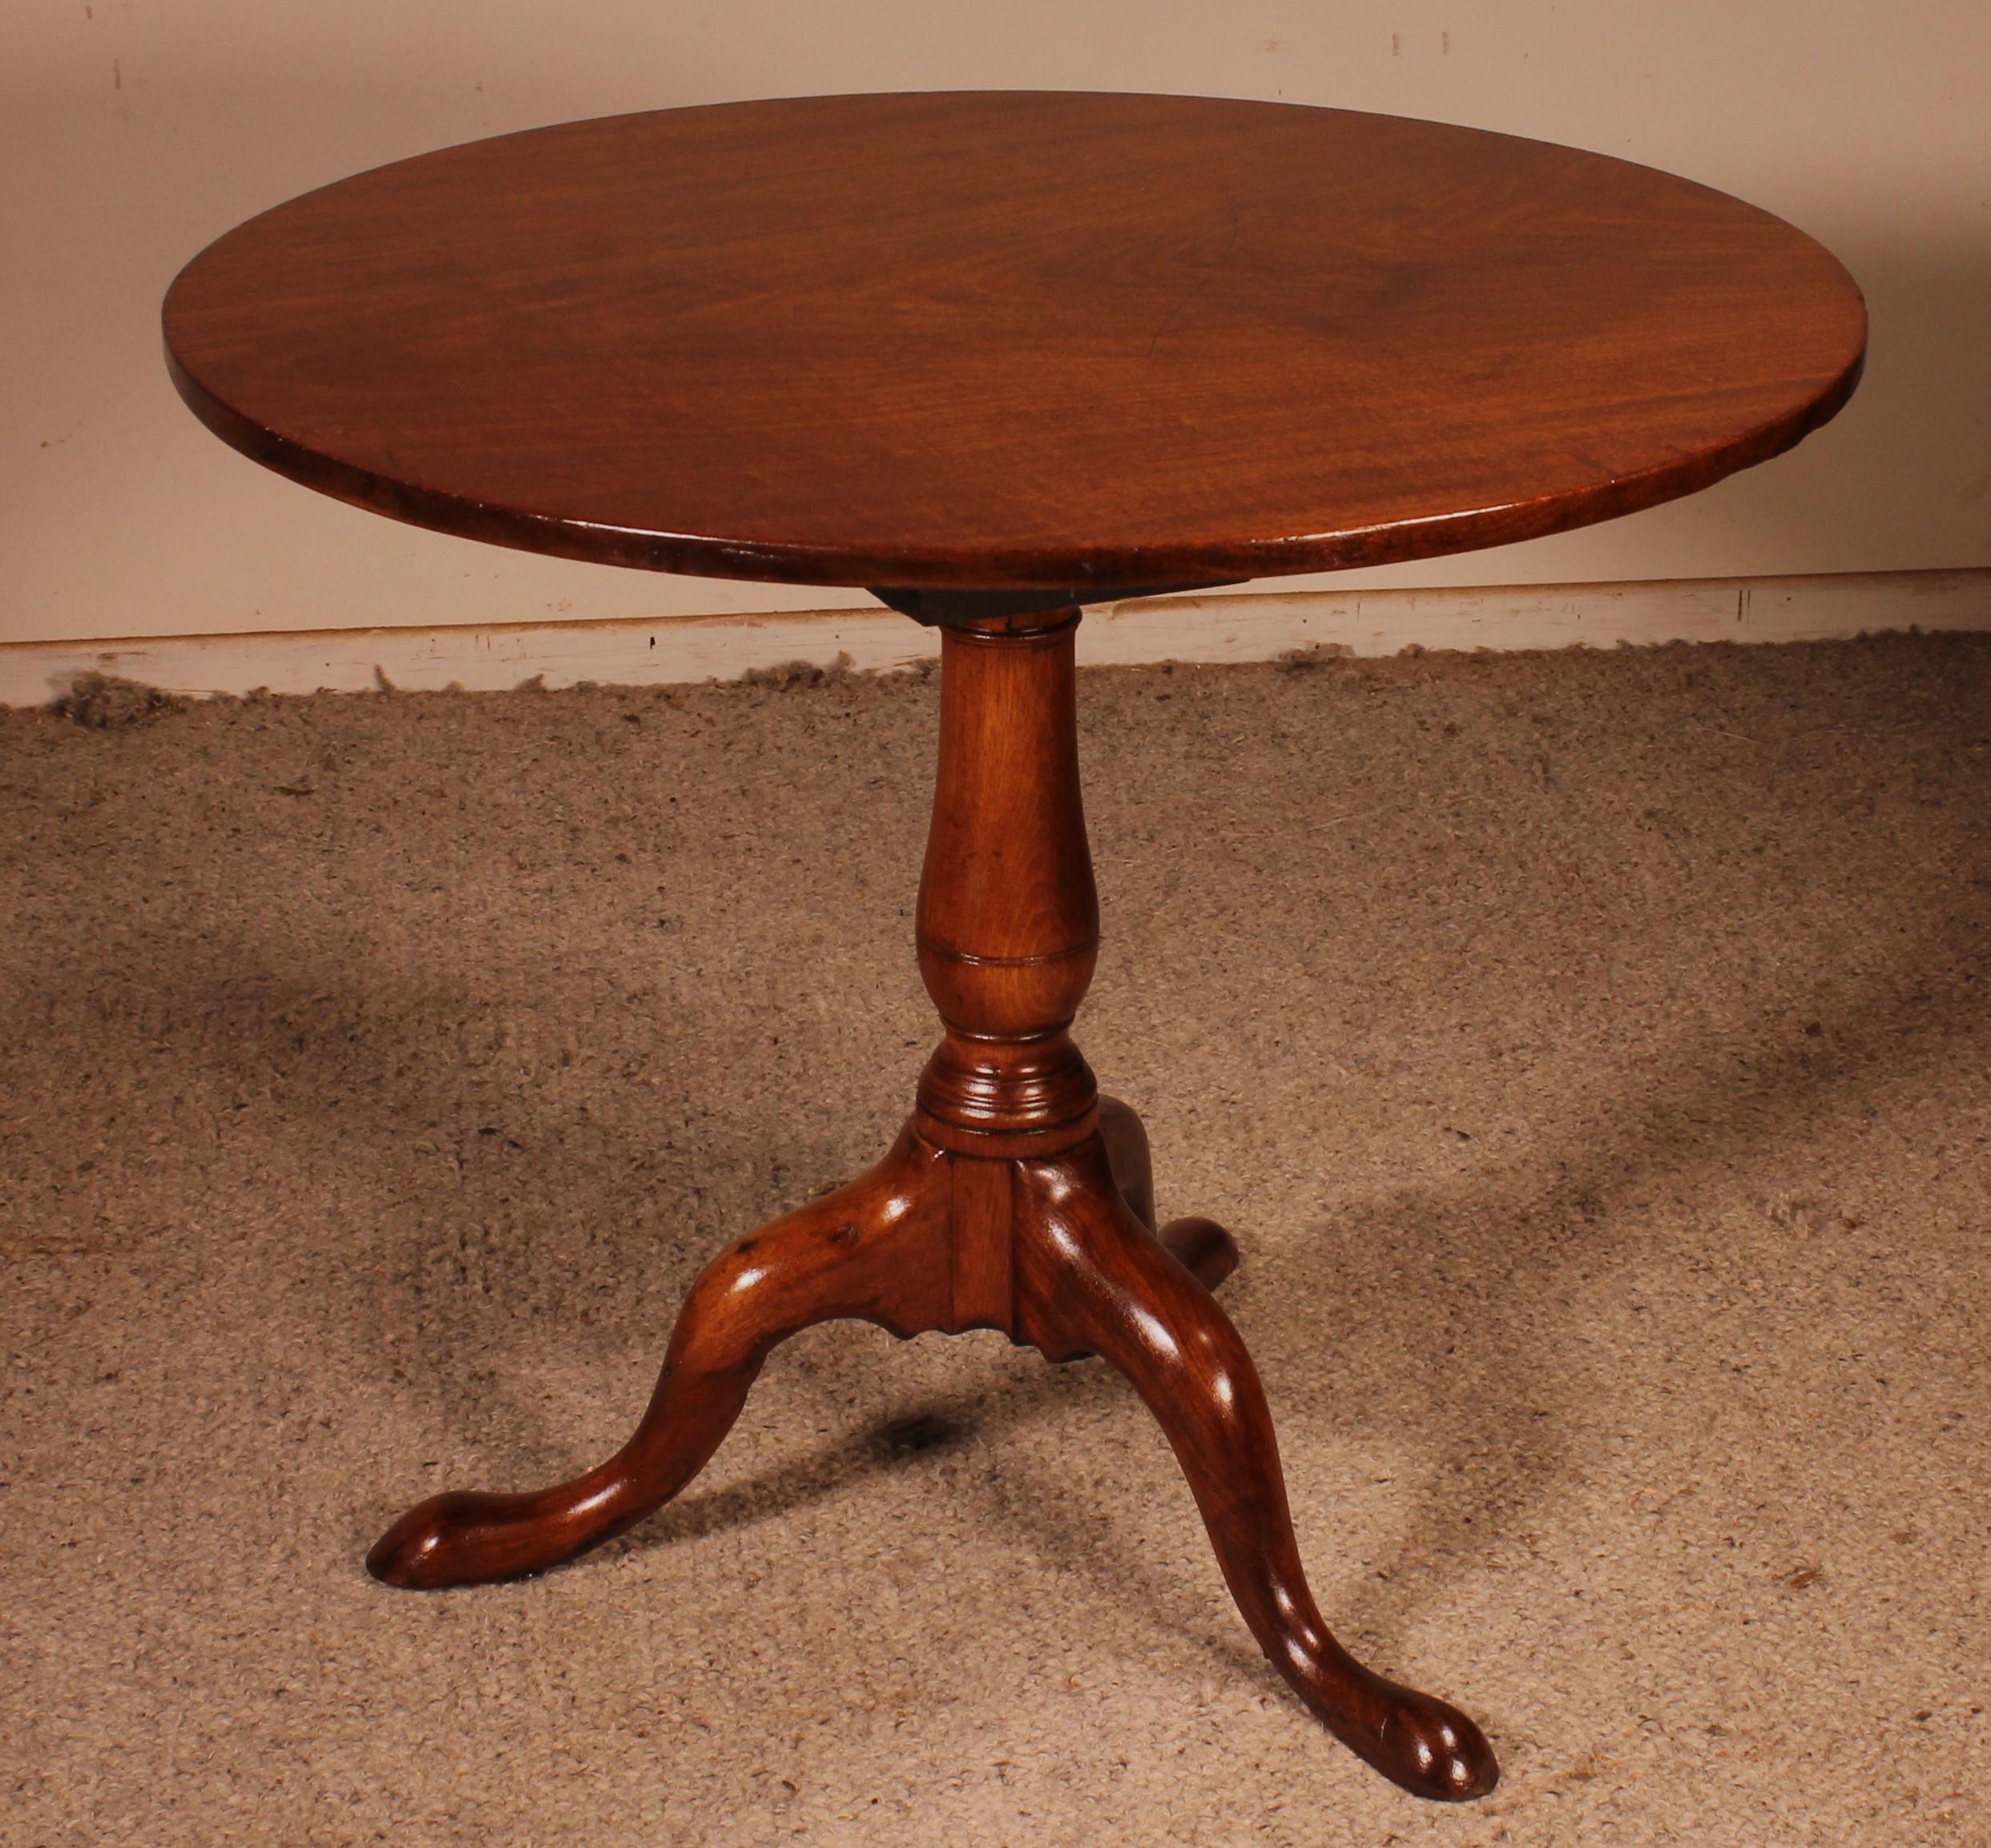 Regency English Tripod Table With Mechanism Circa 1800 For Sale